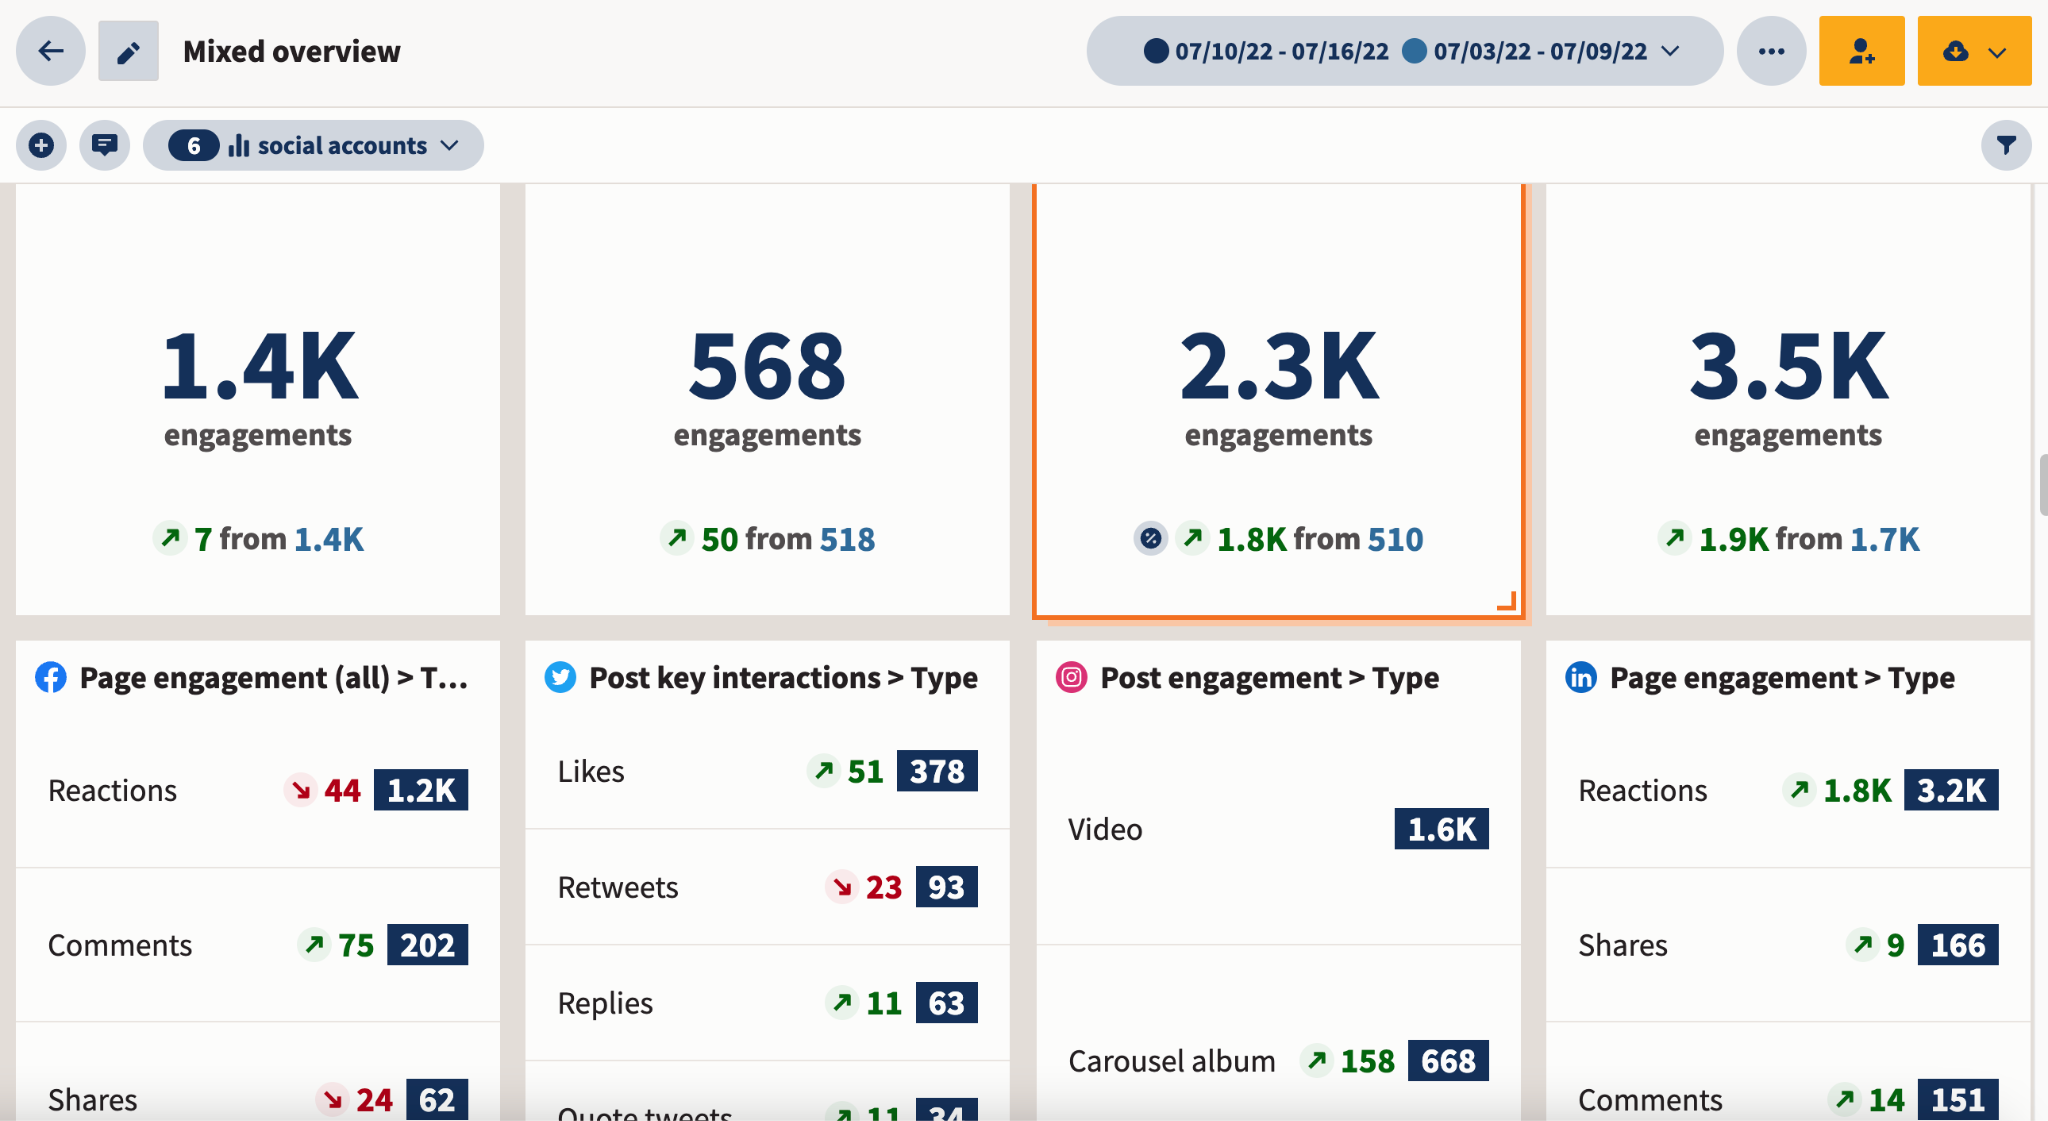 hootsuite analytics dashboard showing engagement across facebook, instagram, linkedin, and twitter